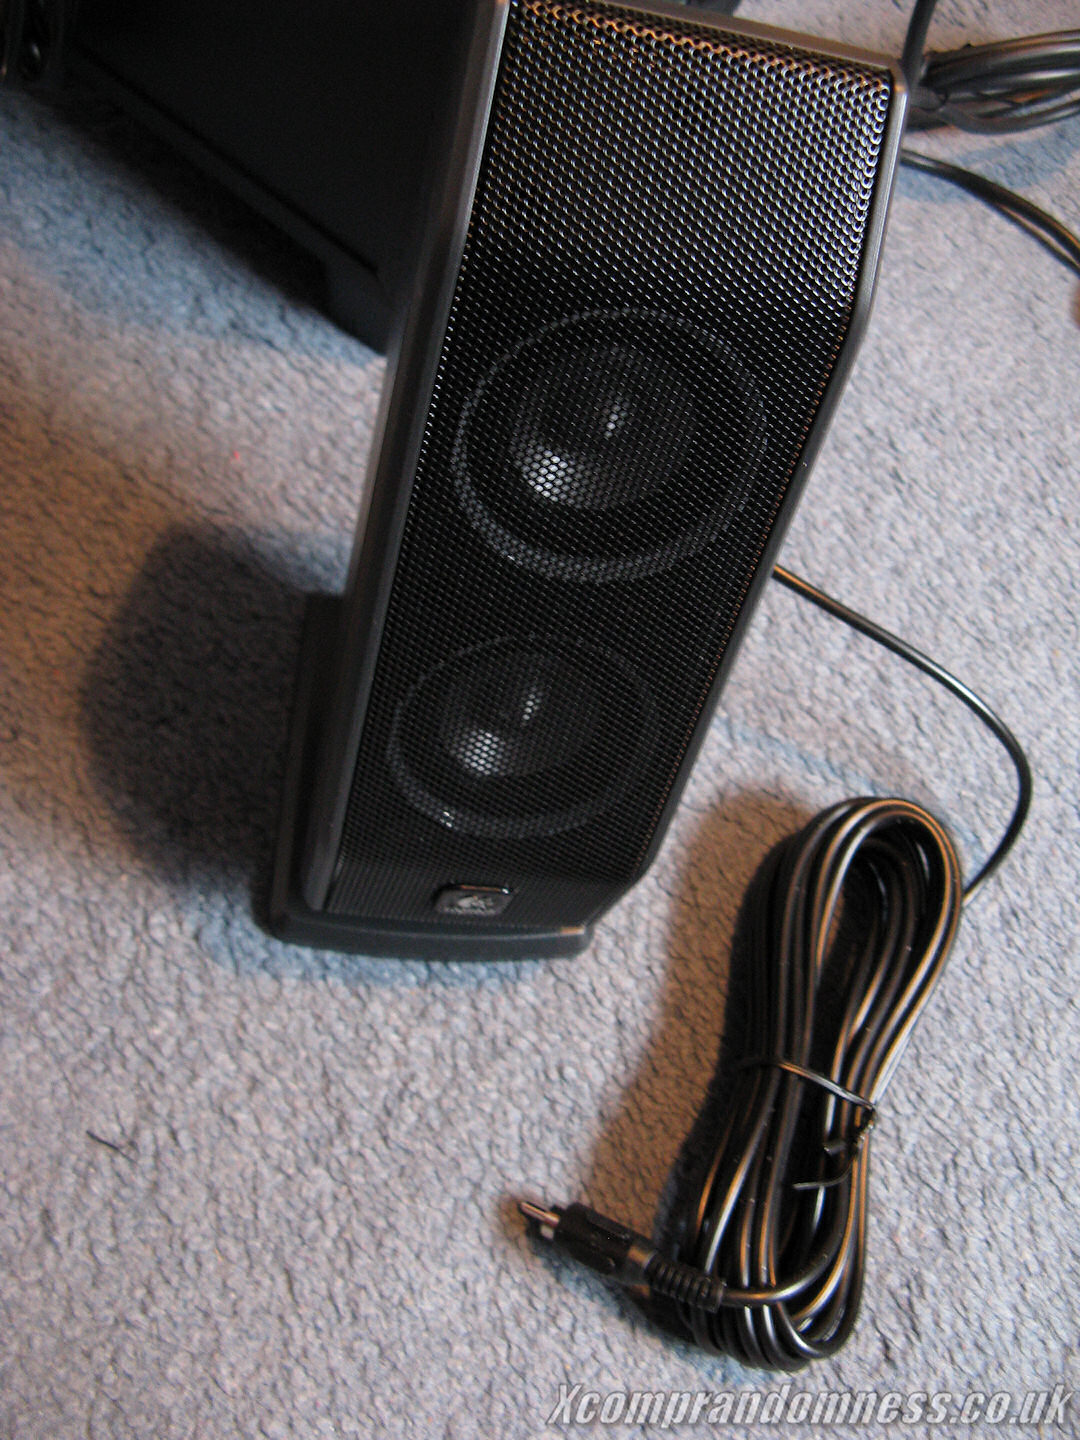 Logitech X-540 Speakers Review | LH Yeung.net Blog - AniGames